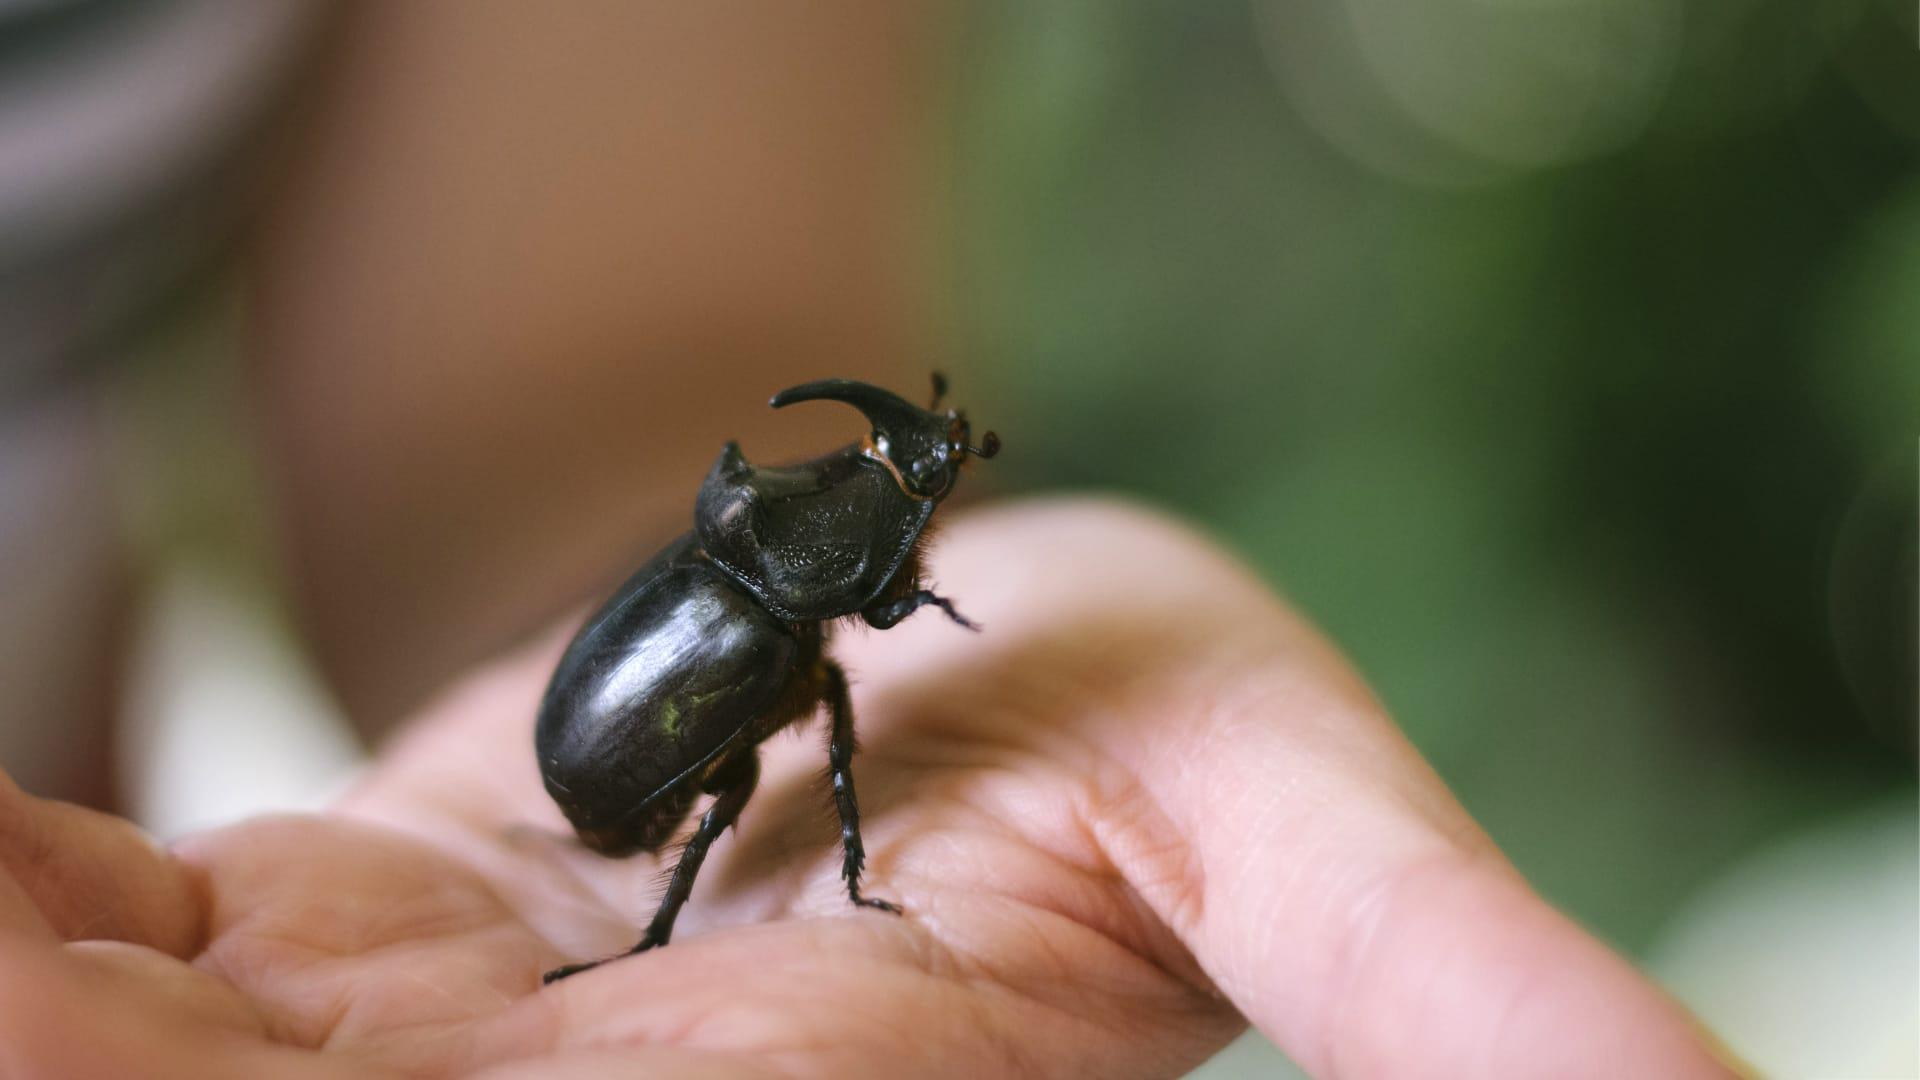 Black beetle pictures